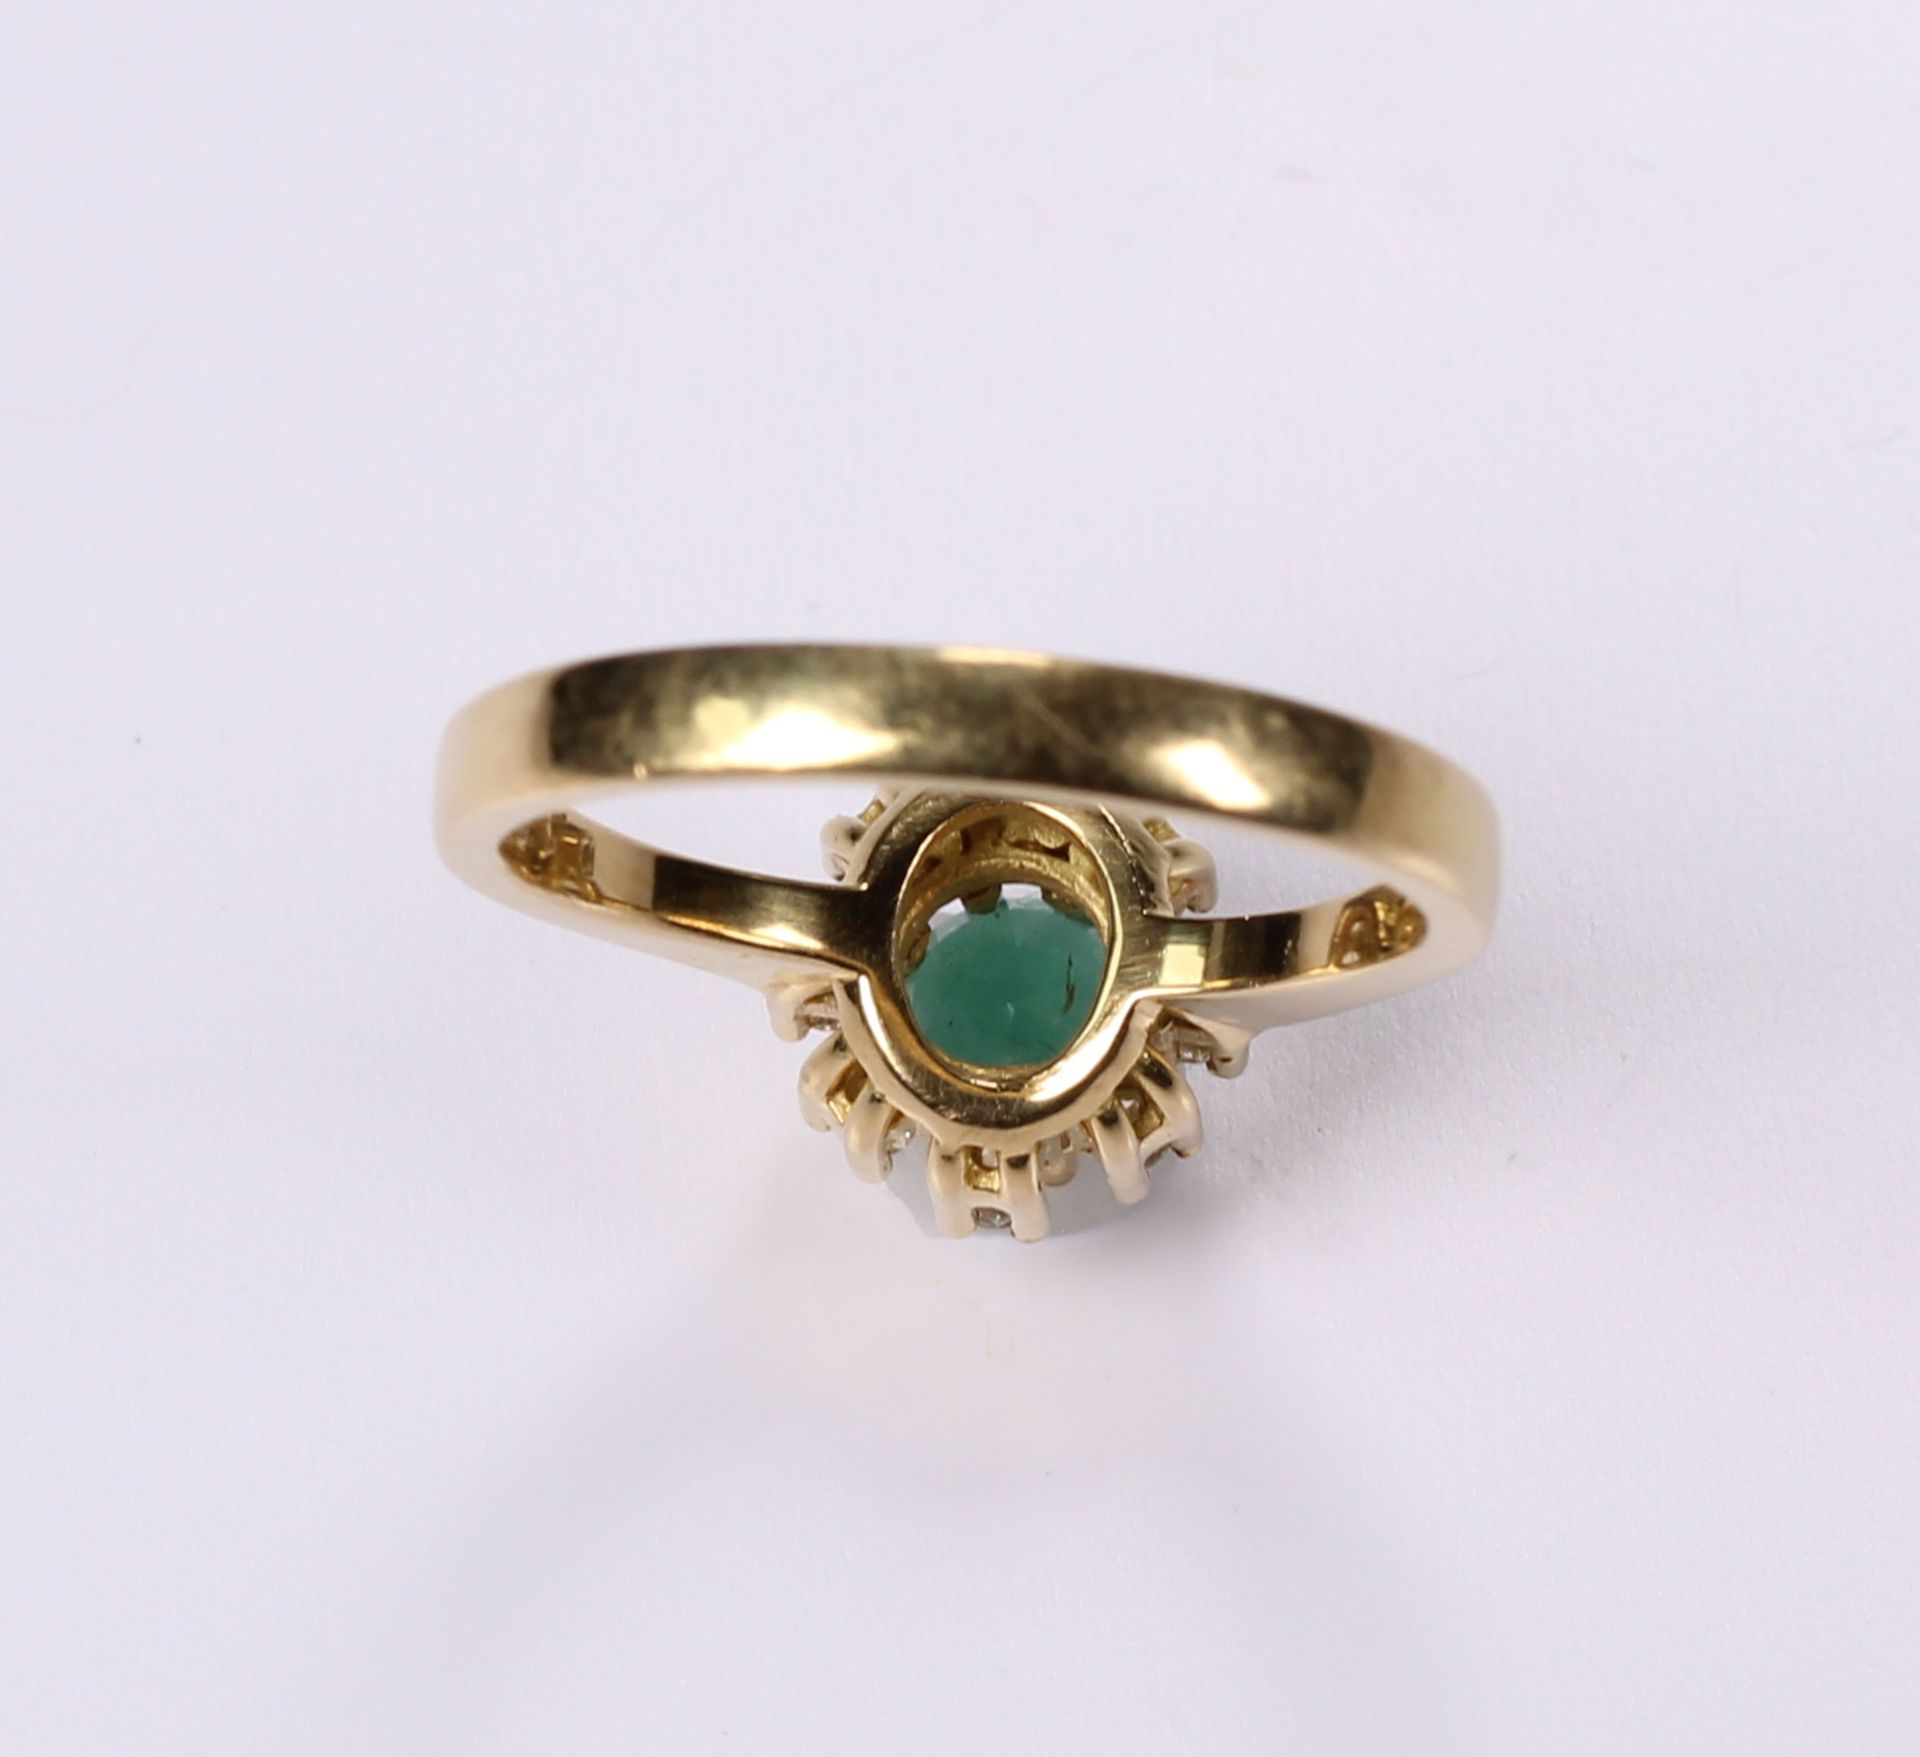 18K Yellow Gold Ring with Emerald and Diamonds - Image 4 of 4